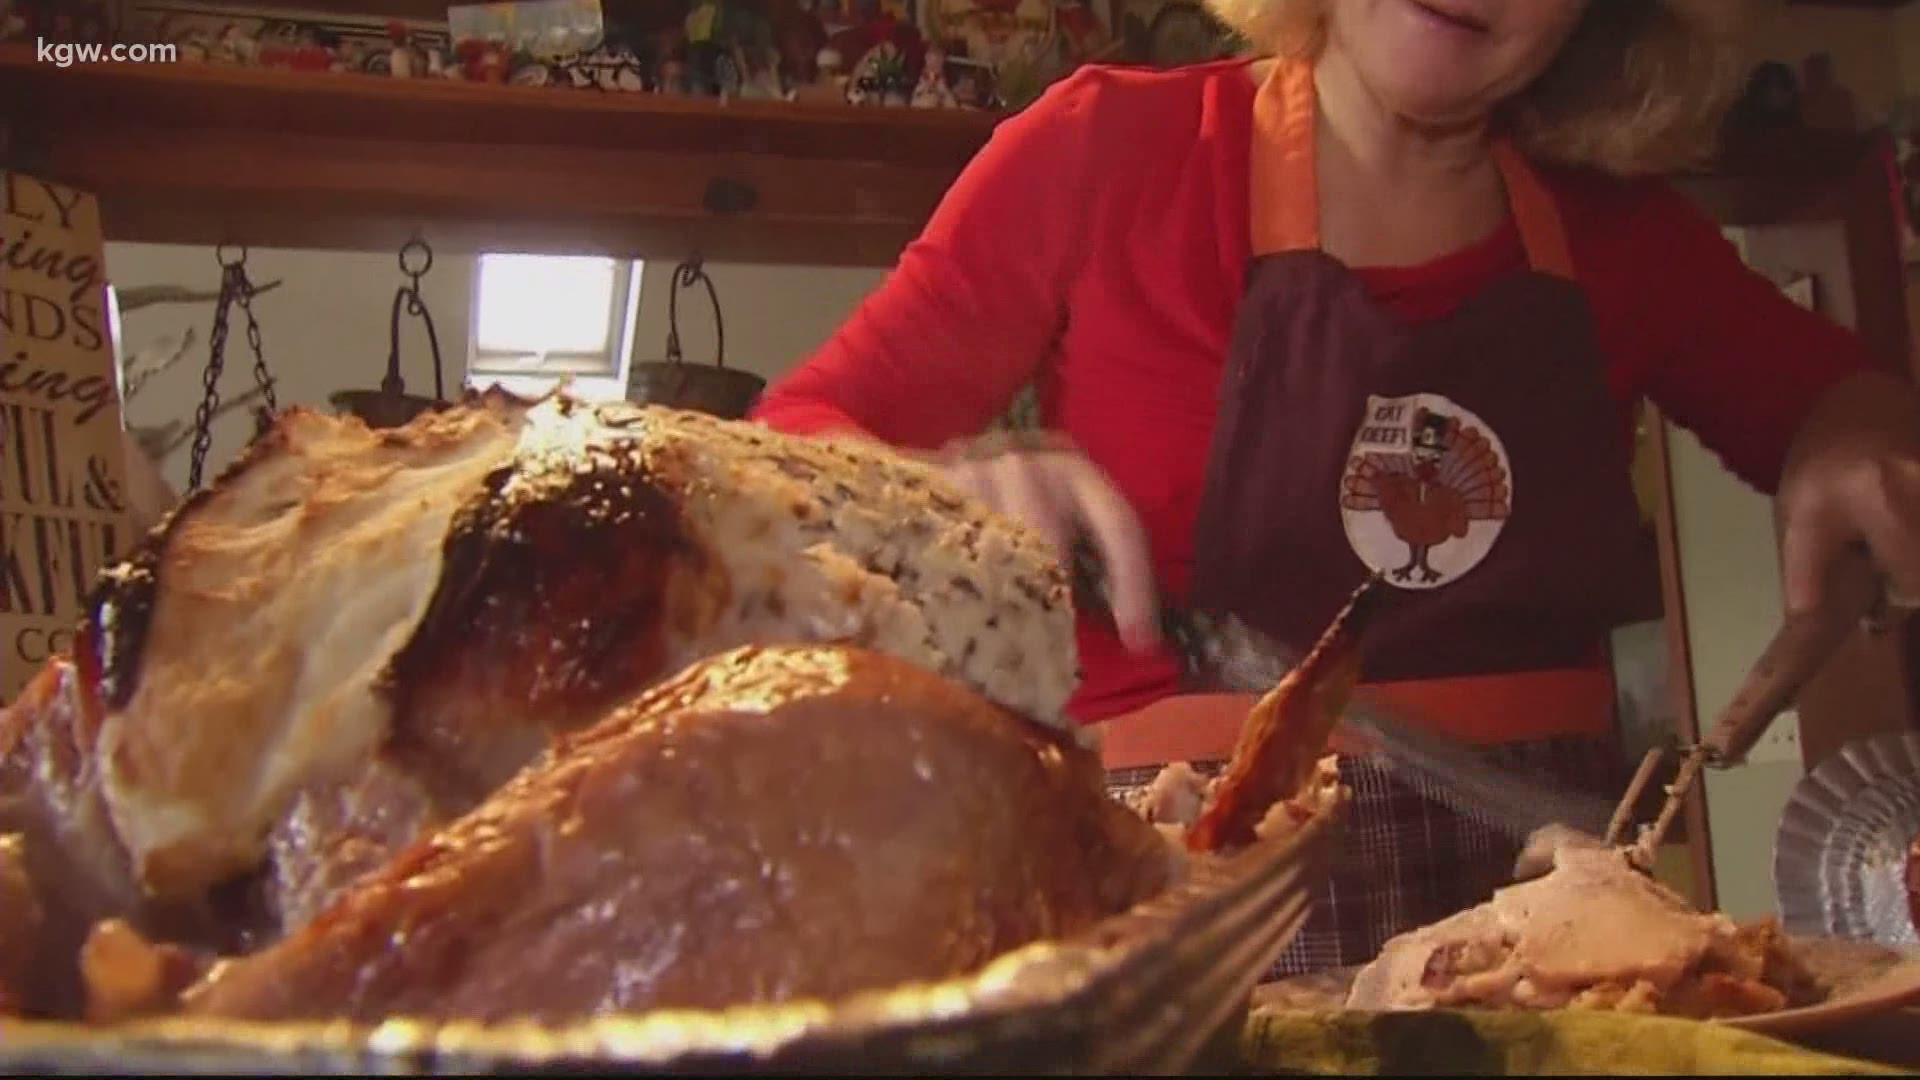 Health experts offer advice to limit your risk for coronavirus this Thanksgiving. Keely Chalmers reports.